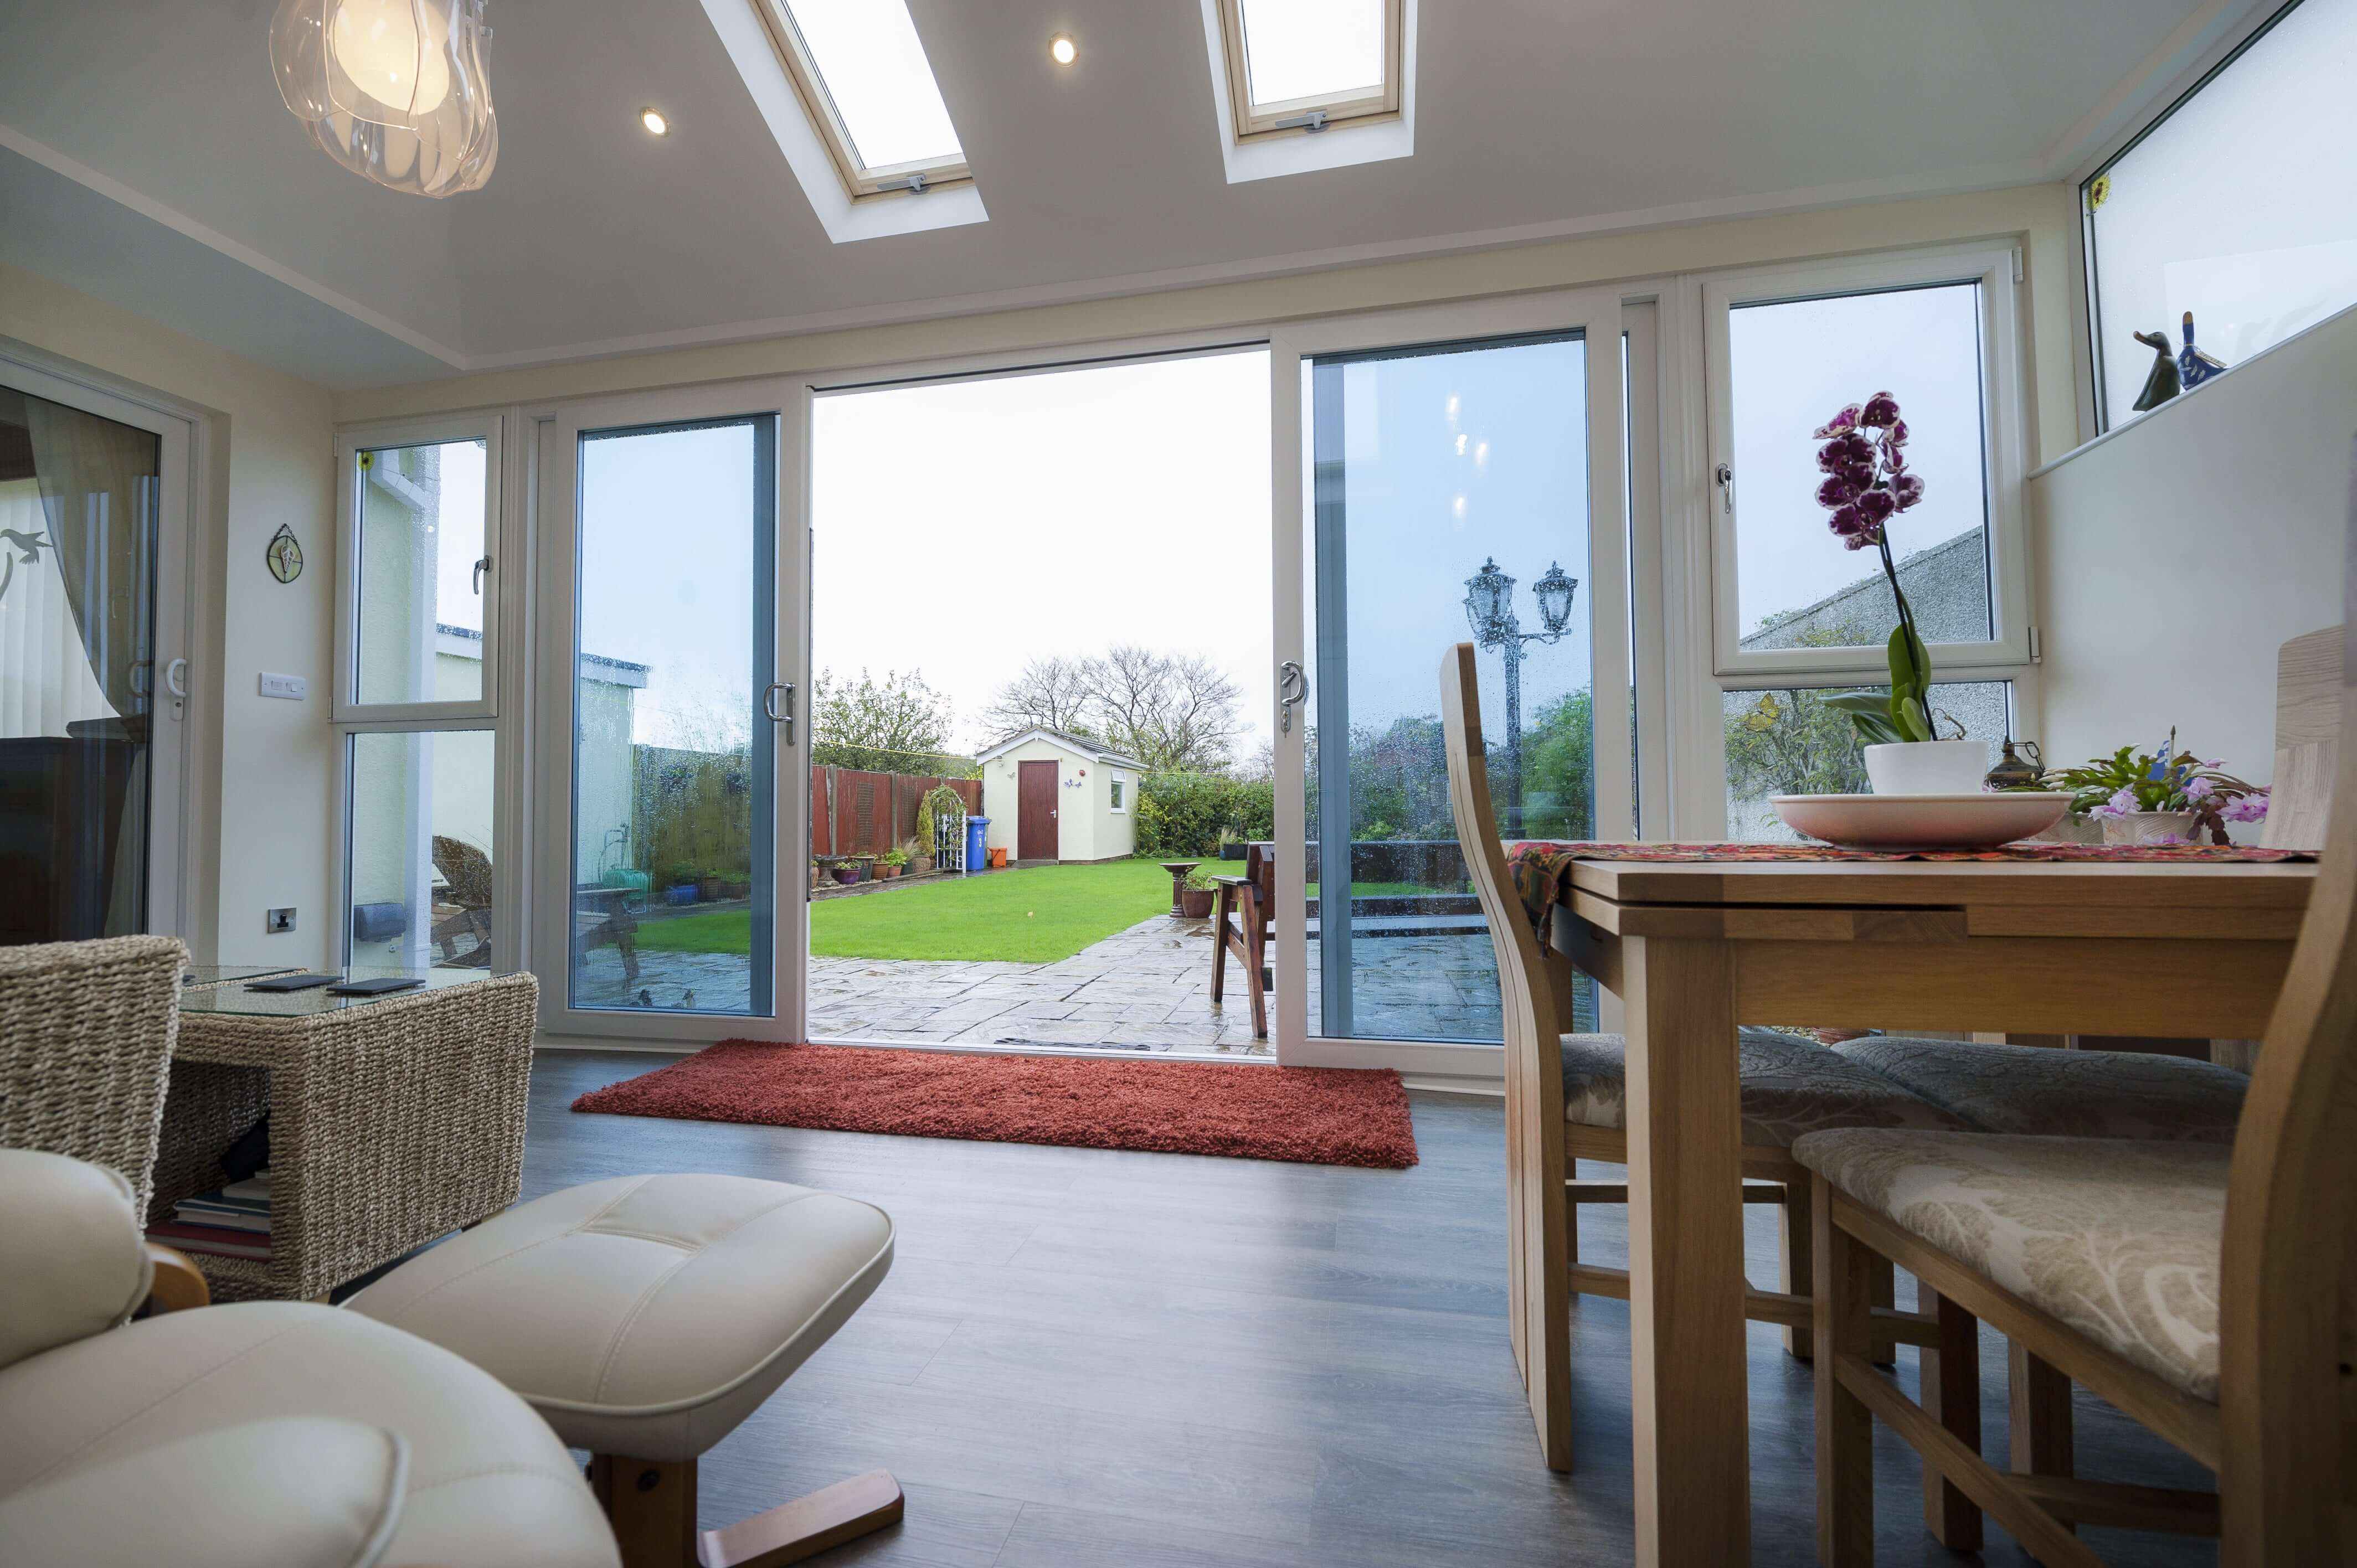 Solid Conservatory - energy efficiency